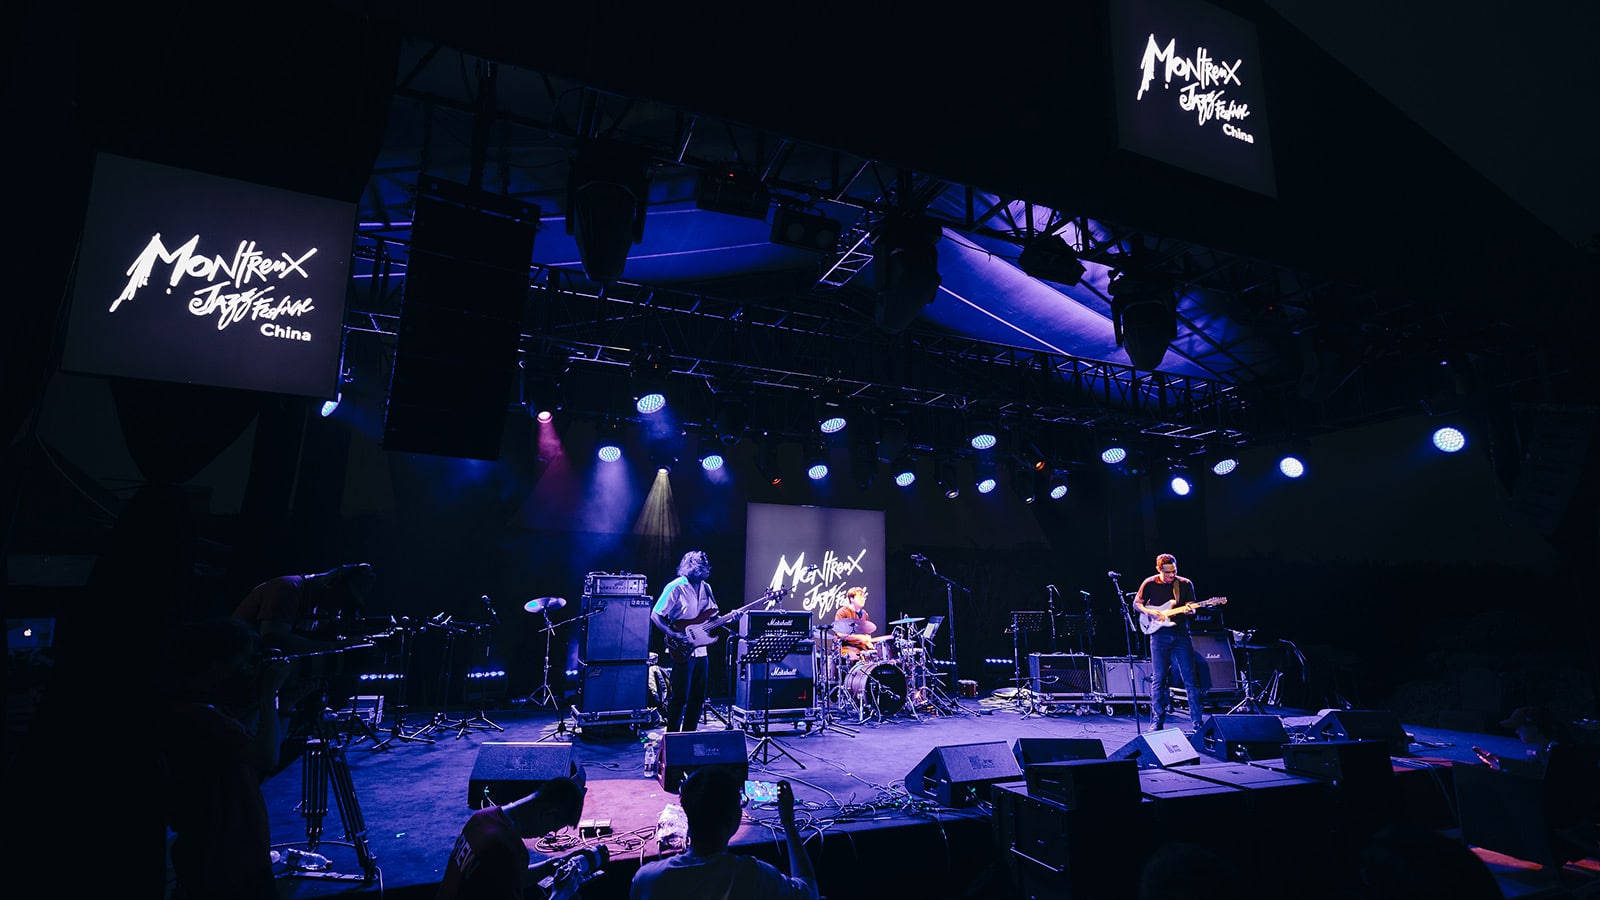 Meyer Sound Transplants a Long Sonic Tradition to Montreux Jazz Festival China